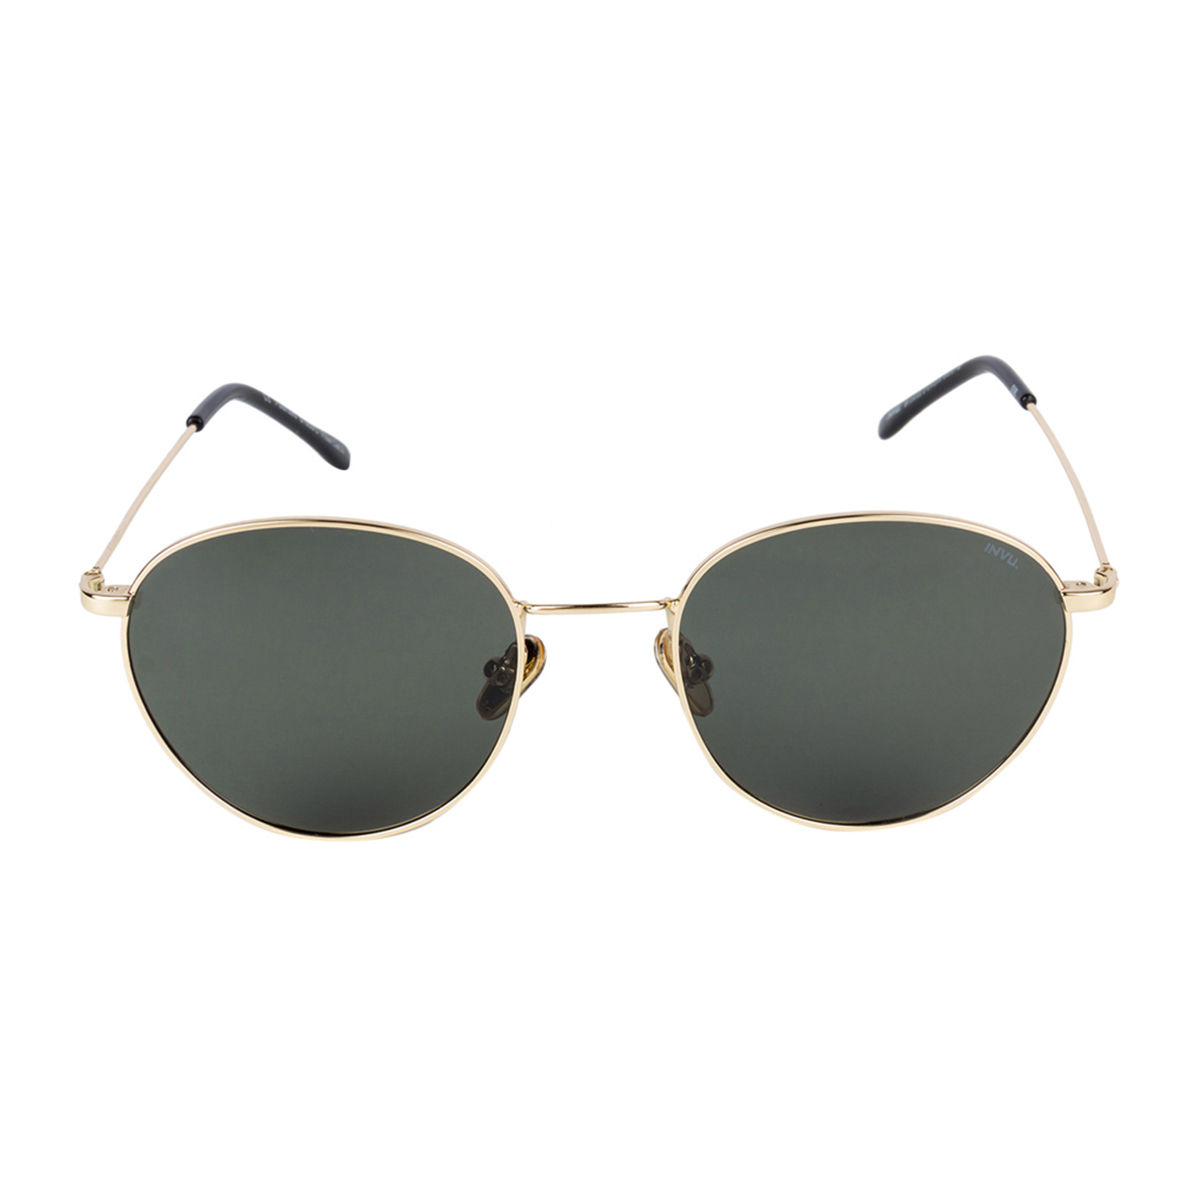 Invu Sunglasses Round With Green Lens For Men